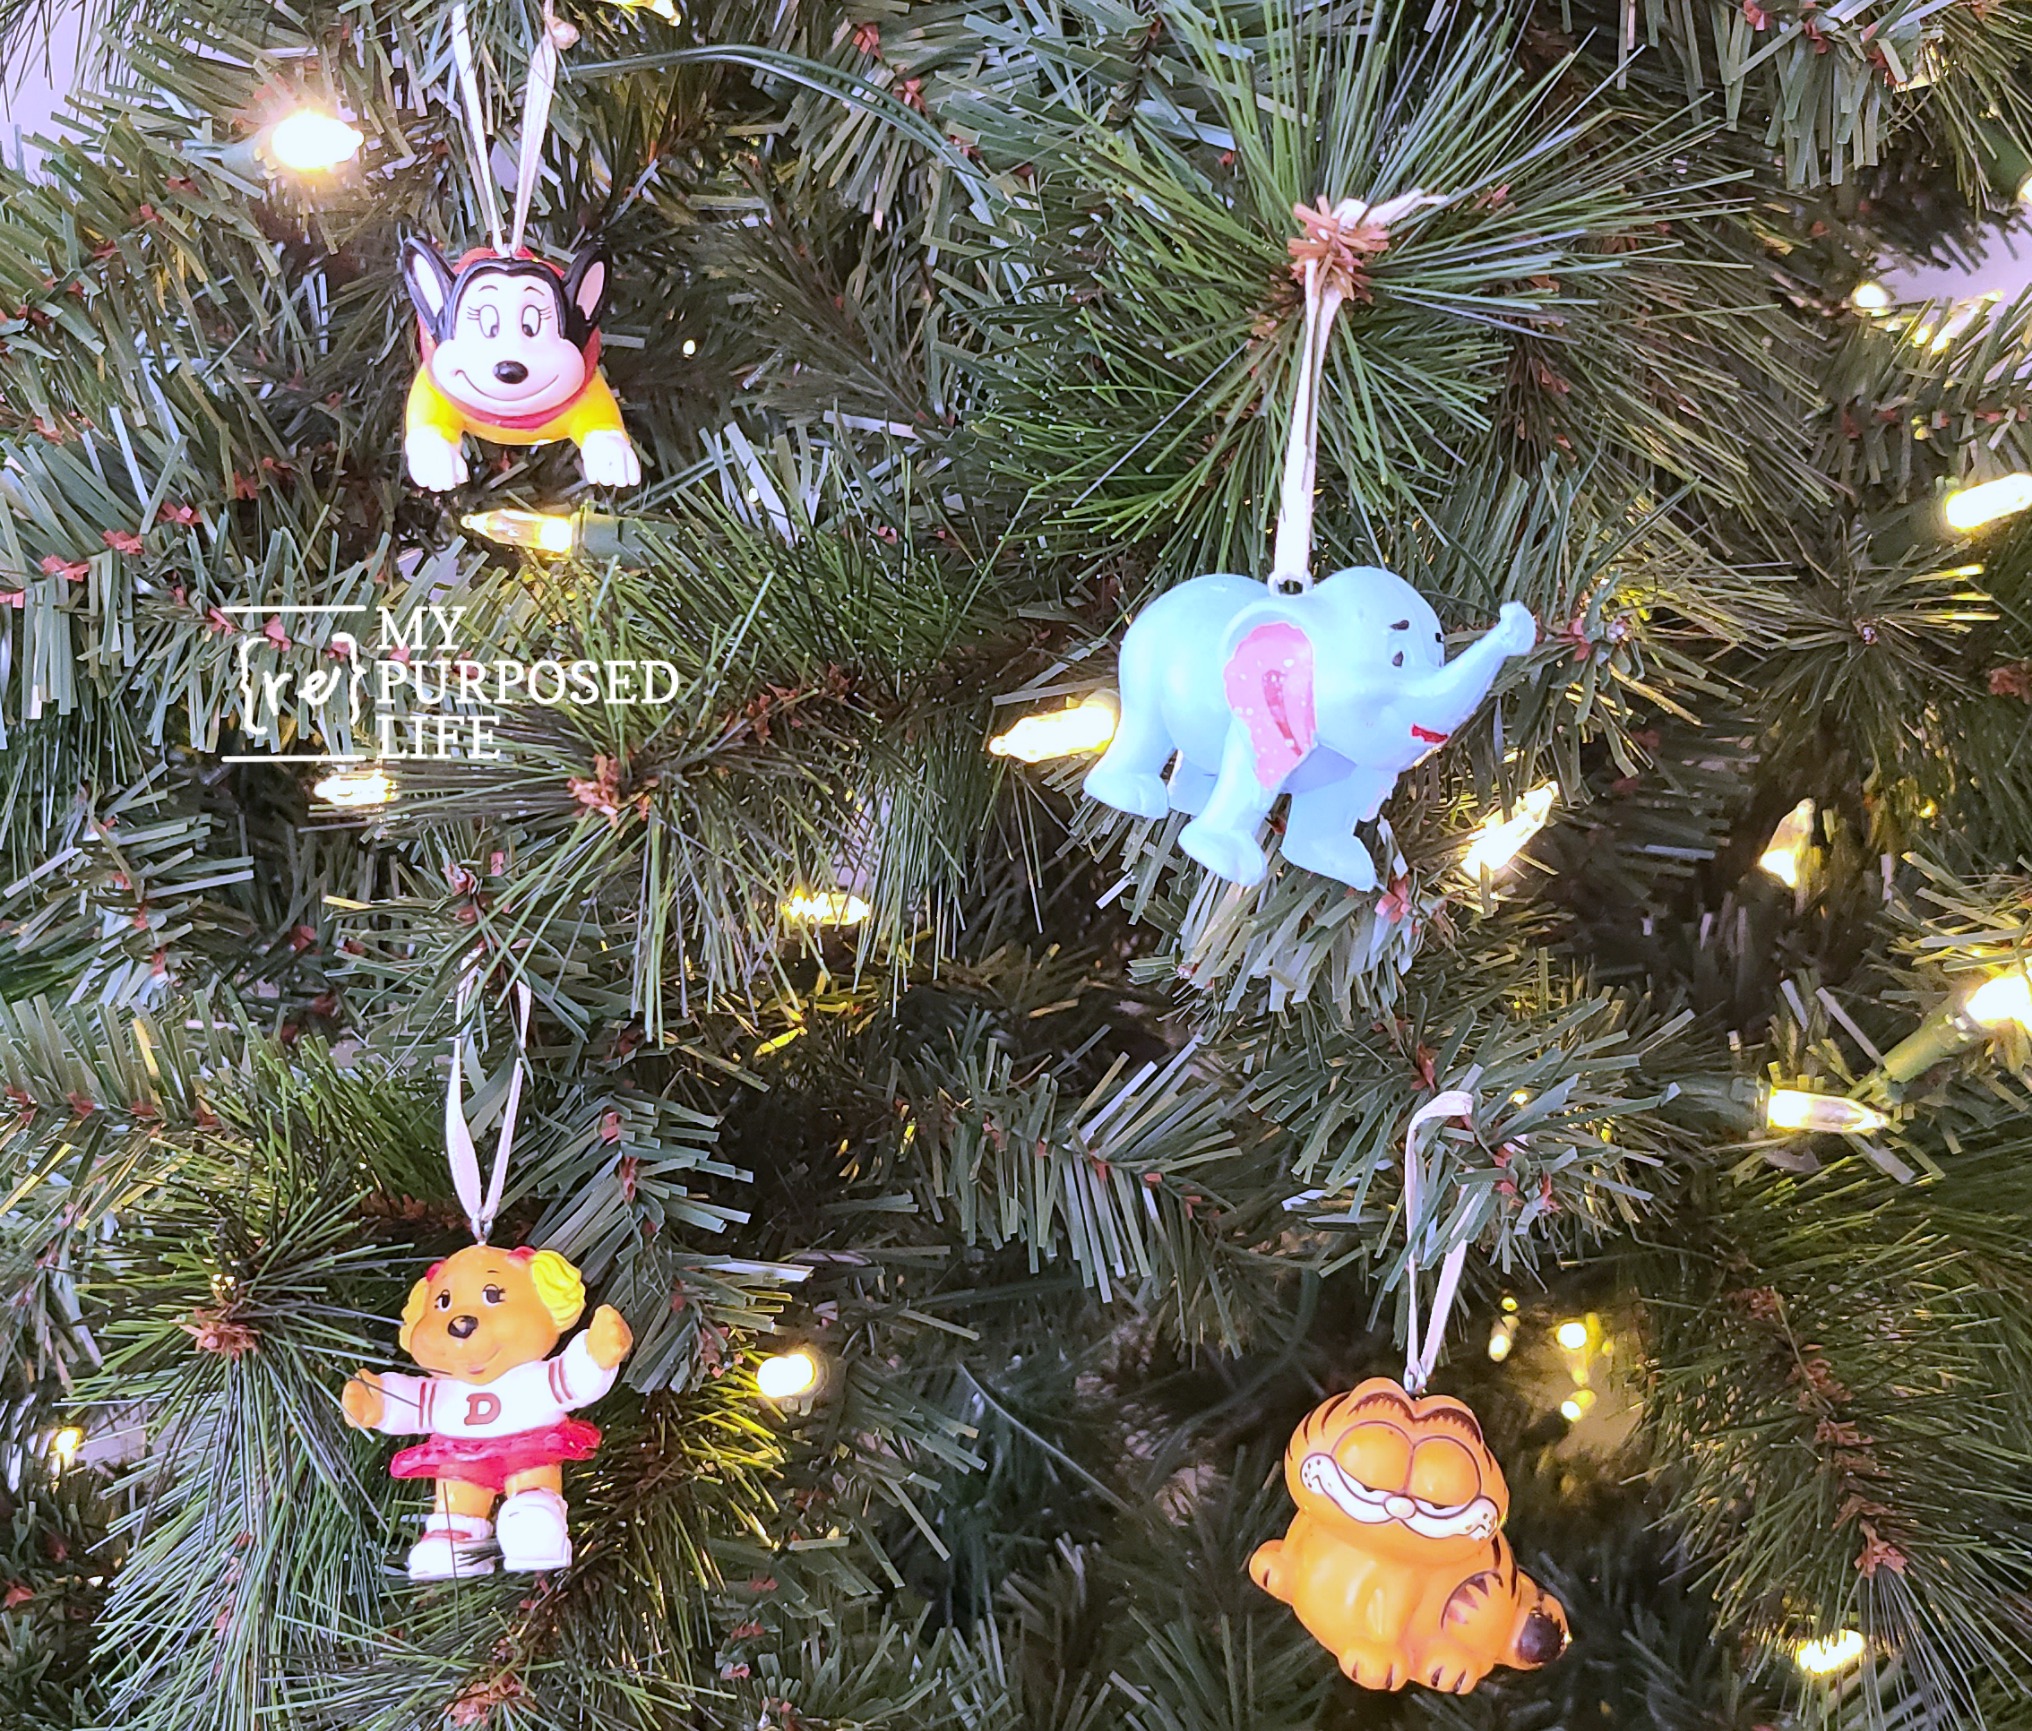 action figures or happy meal toys as Christmas ornaments MyRepurposedLife